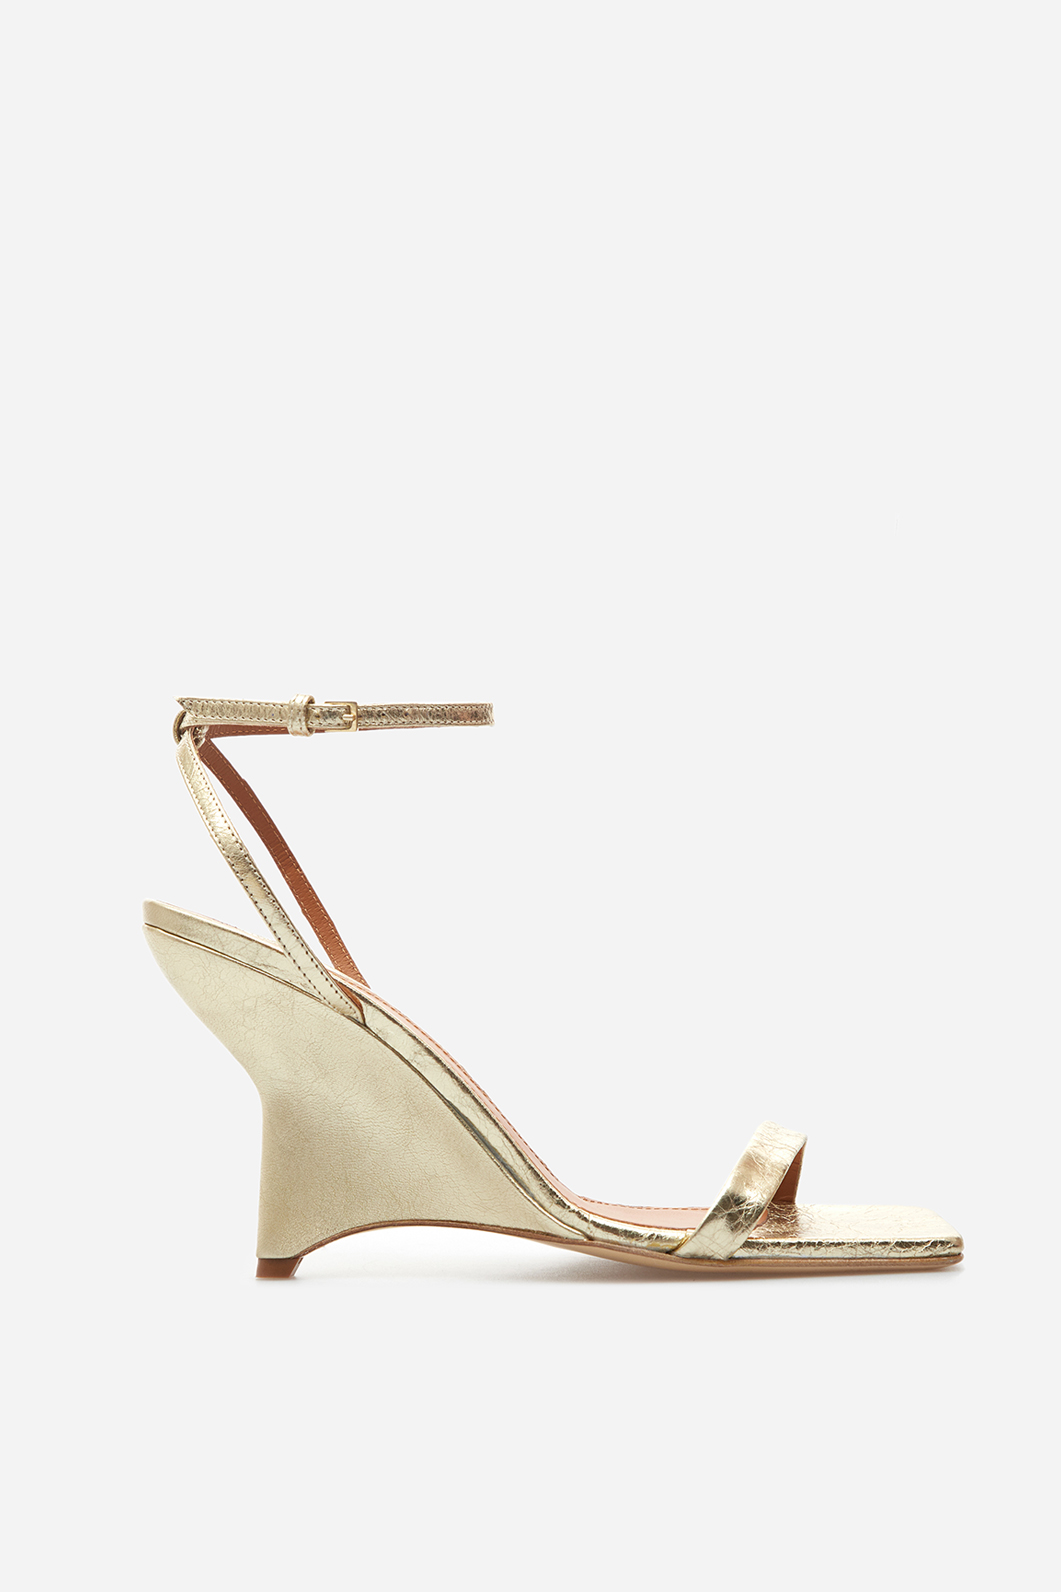 Isa gold leather
sandals